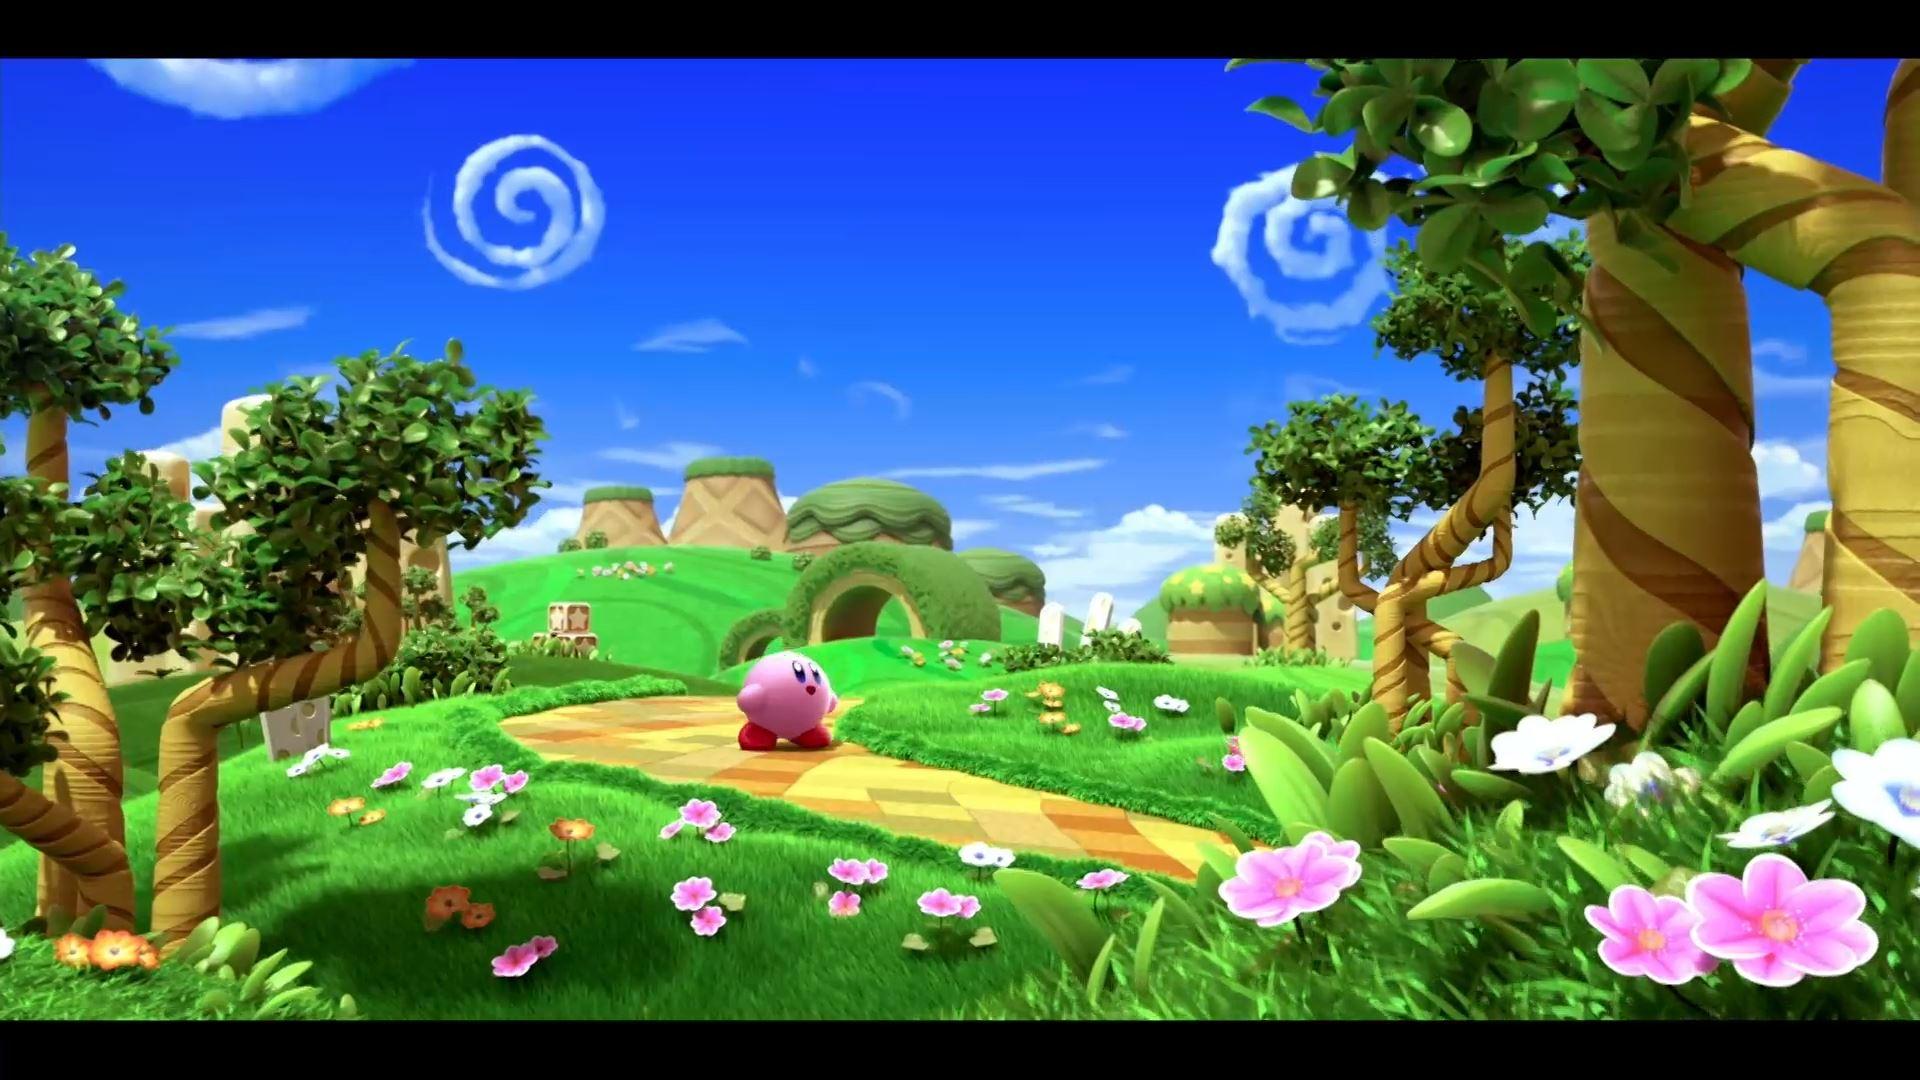 What Is Kirby? Unpacking the Popular Video Game Character